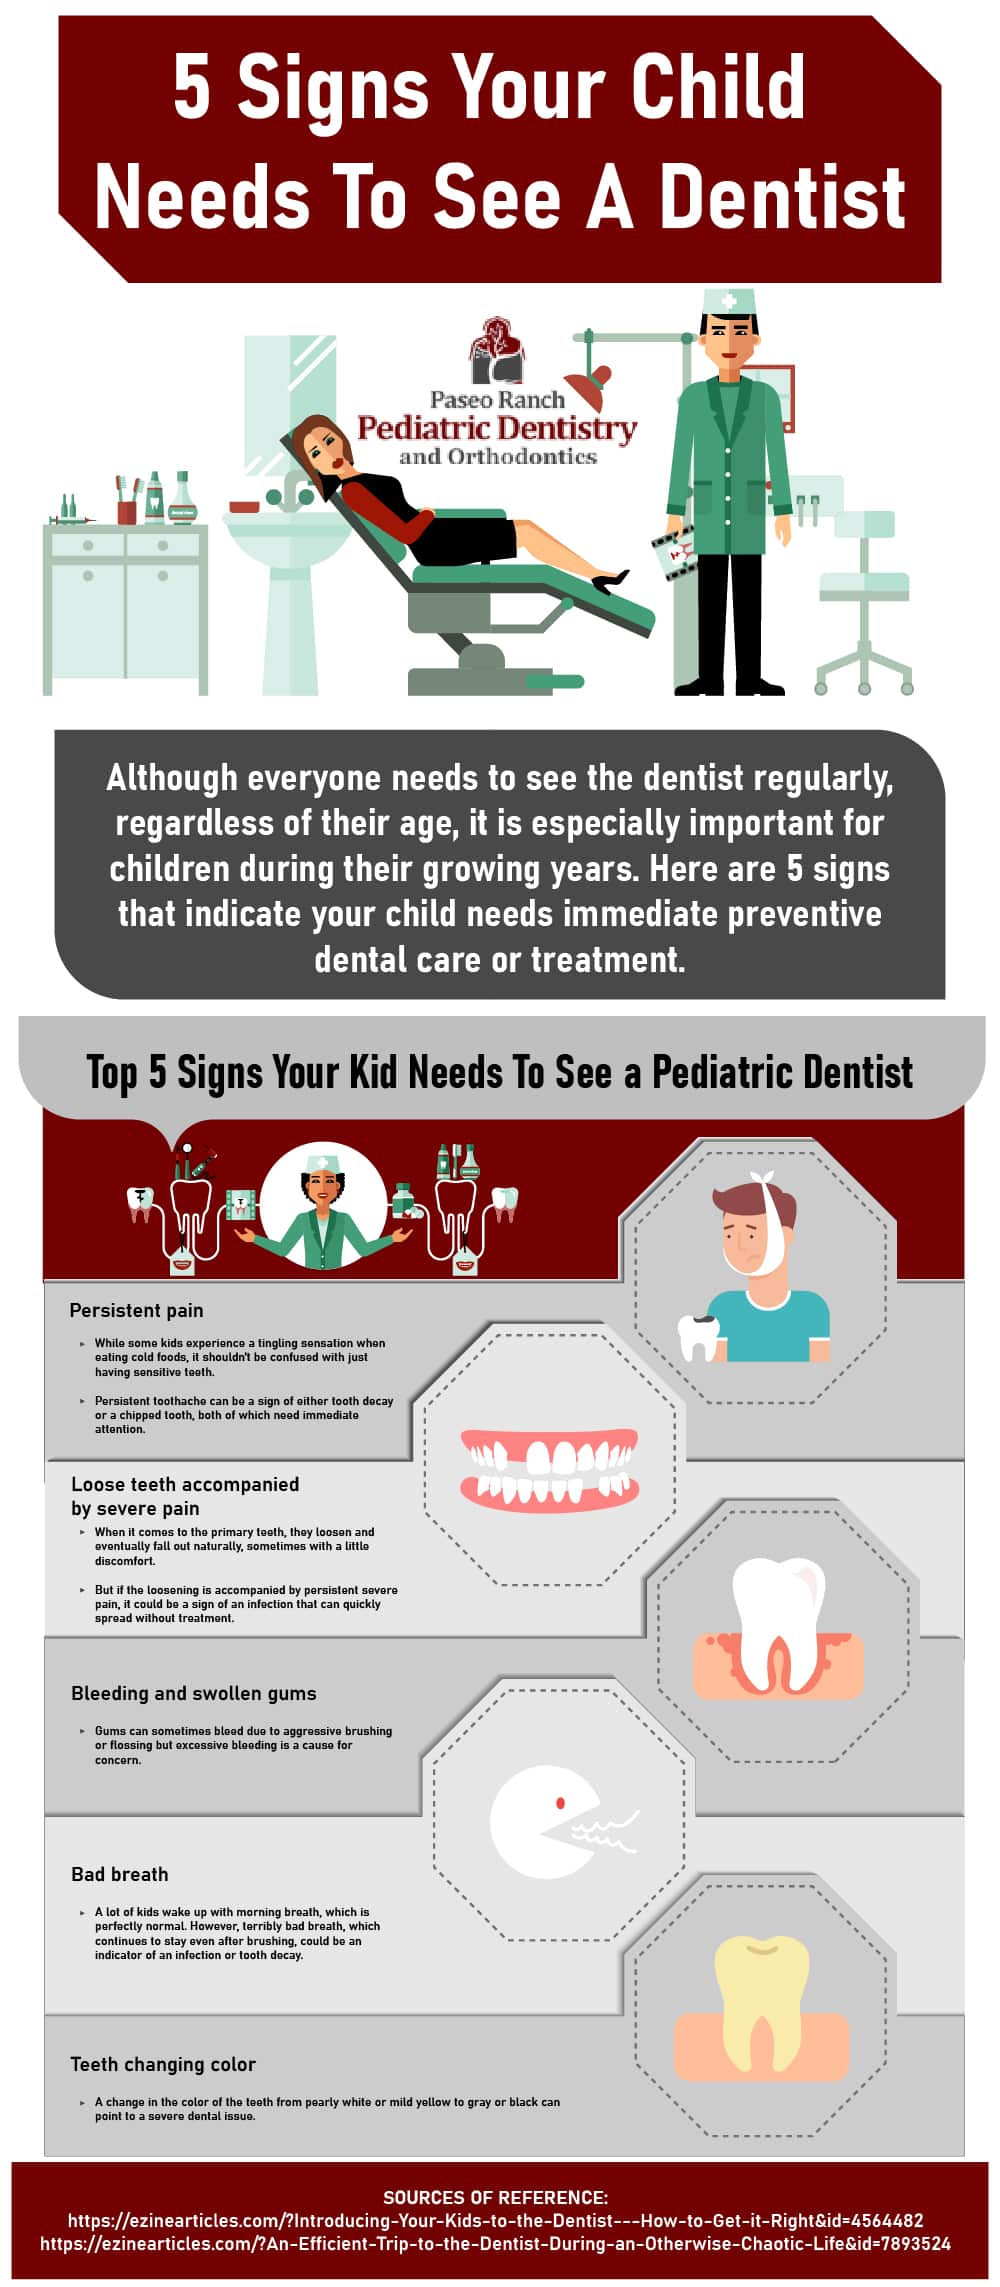 5 Signs Your Child Needs To See A Dentist